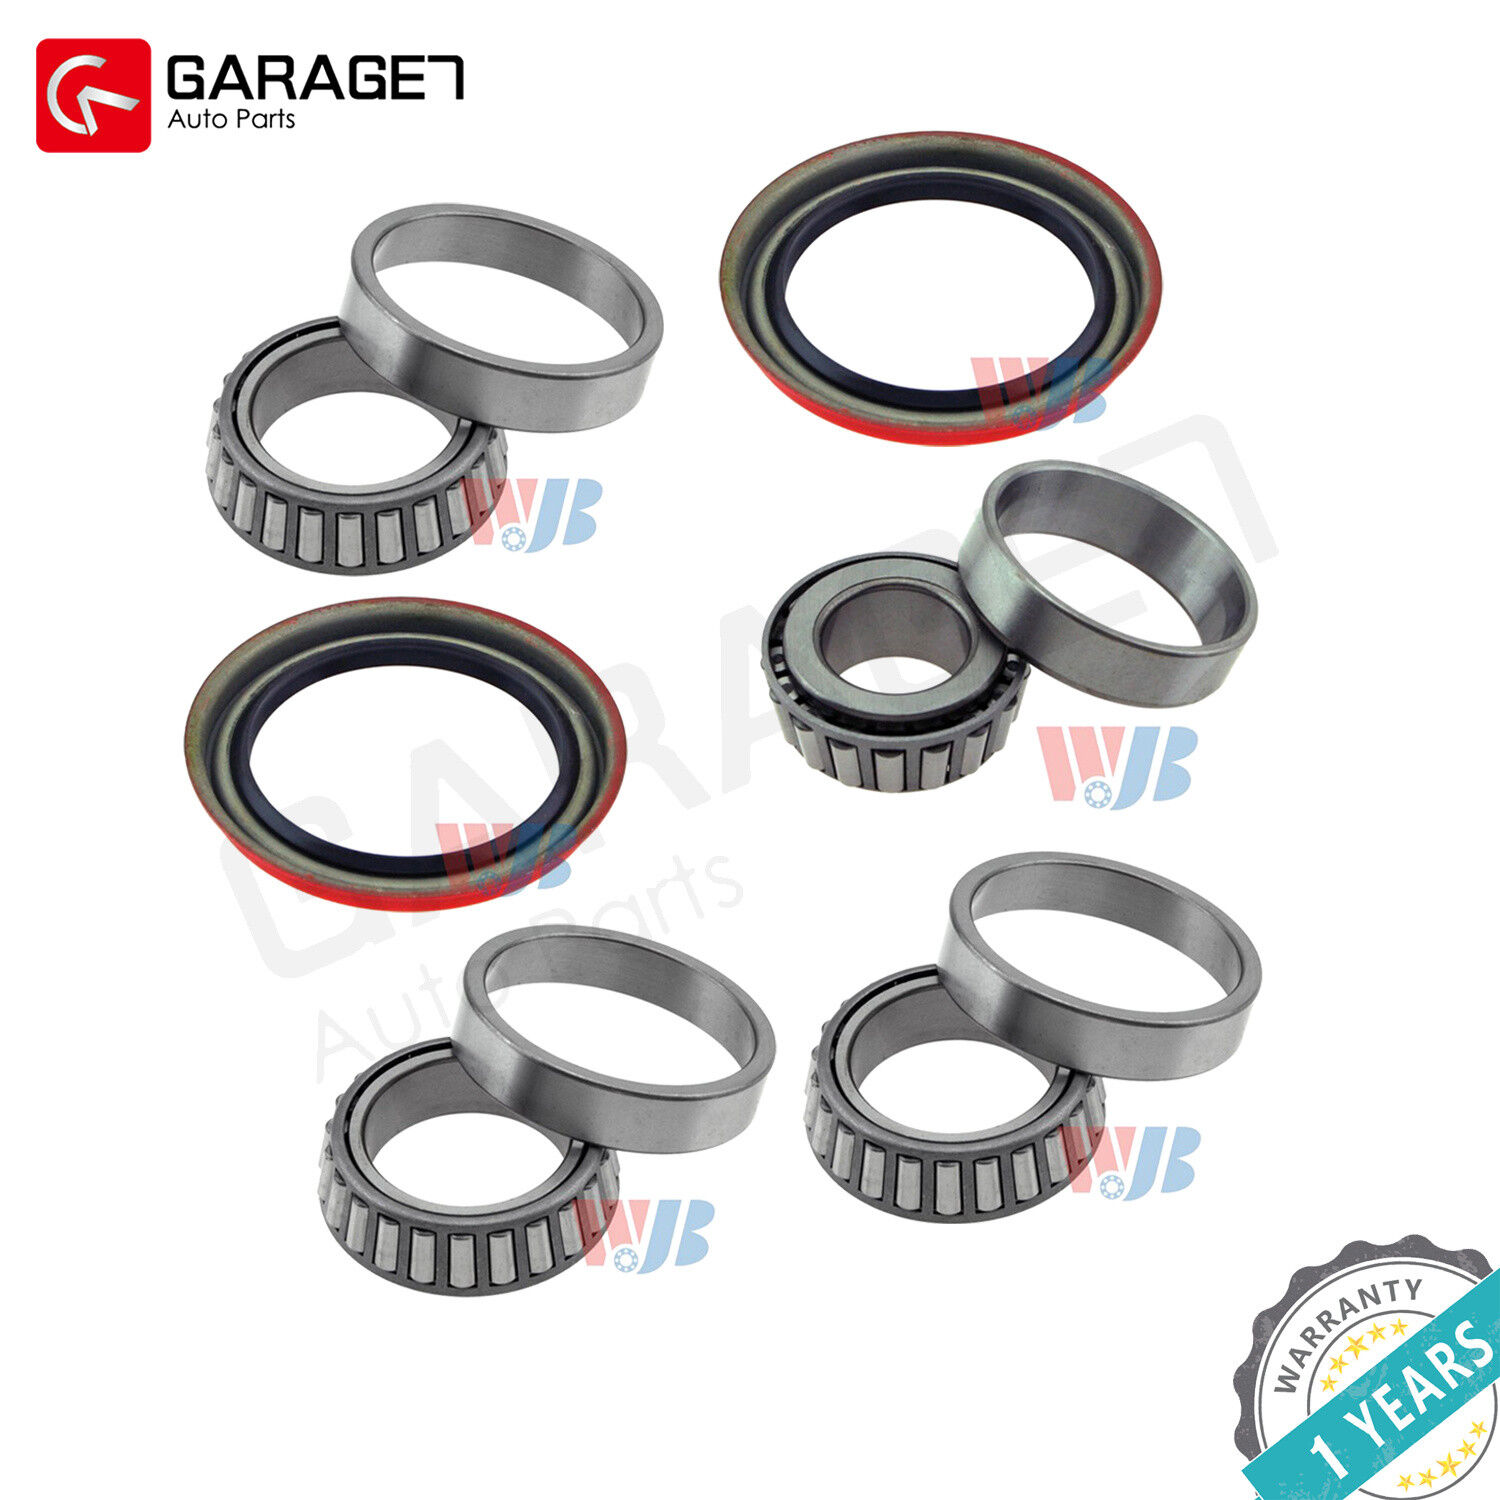 Kit Front Wheel Bearing Race & Seal for Chevy Camaro Base Coupe 2-Door